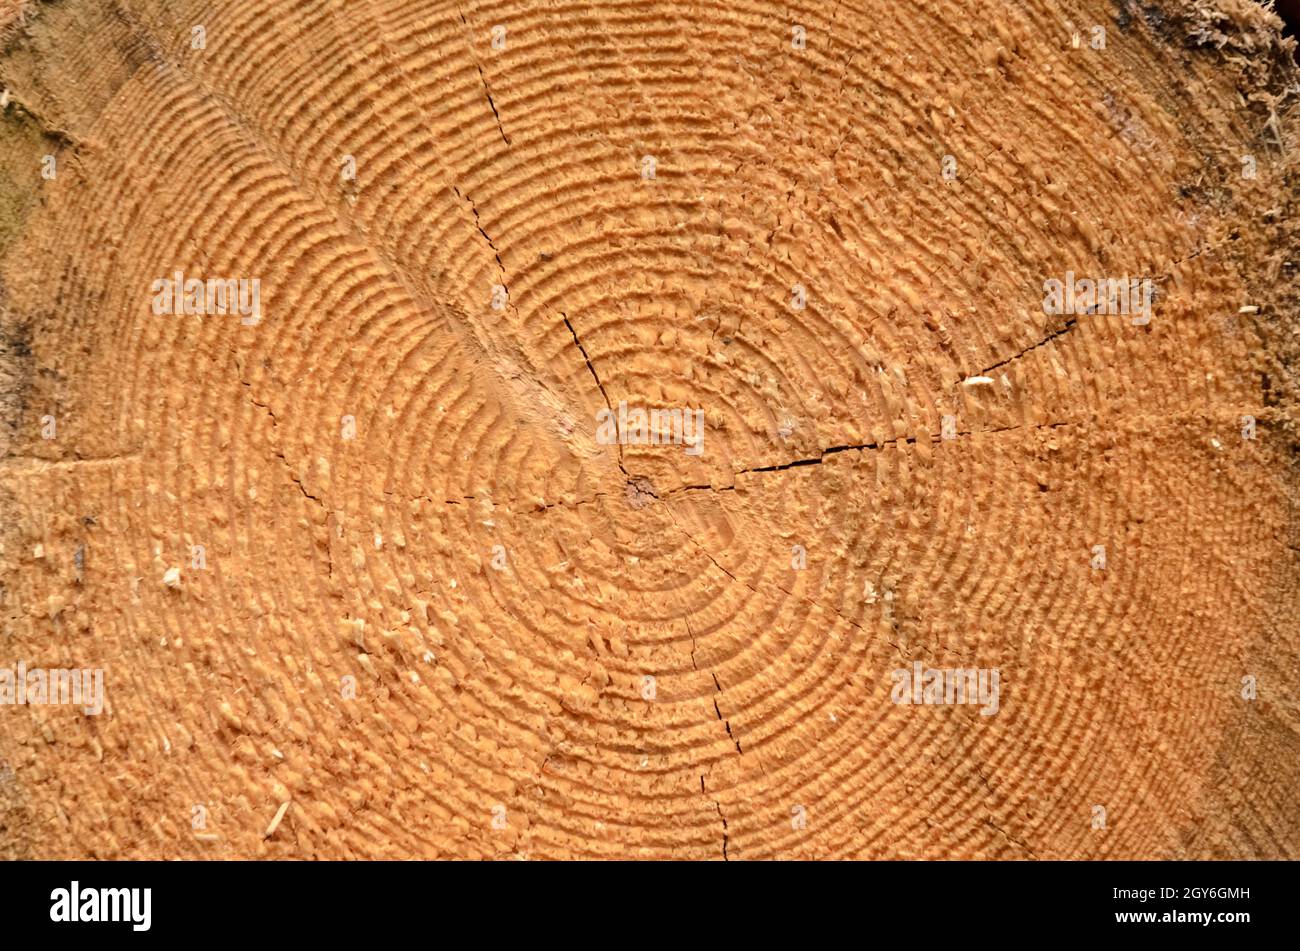 Close-up view and cross-section of growth rings of a felled tree, wooden natural background Stock Photo